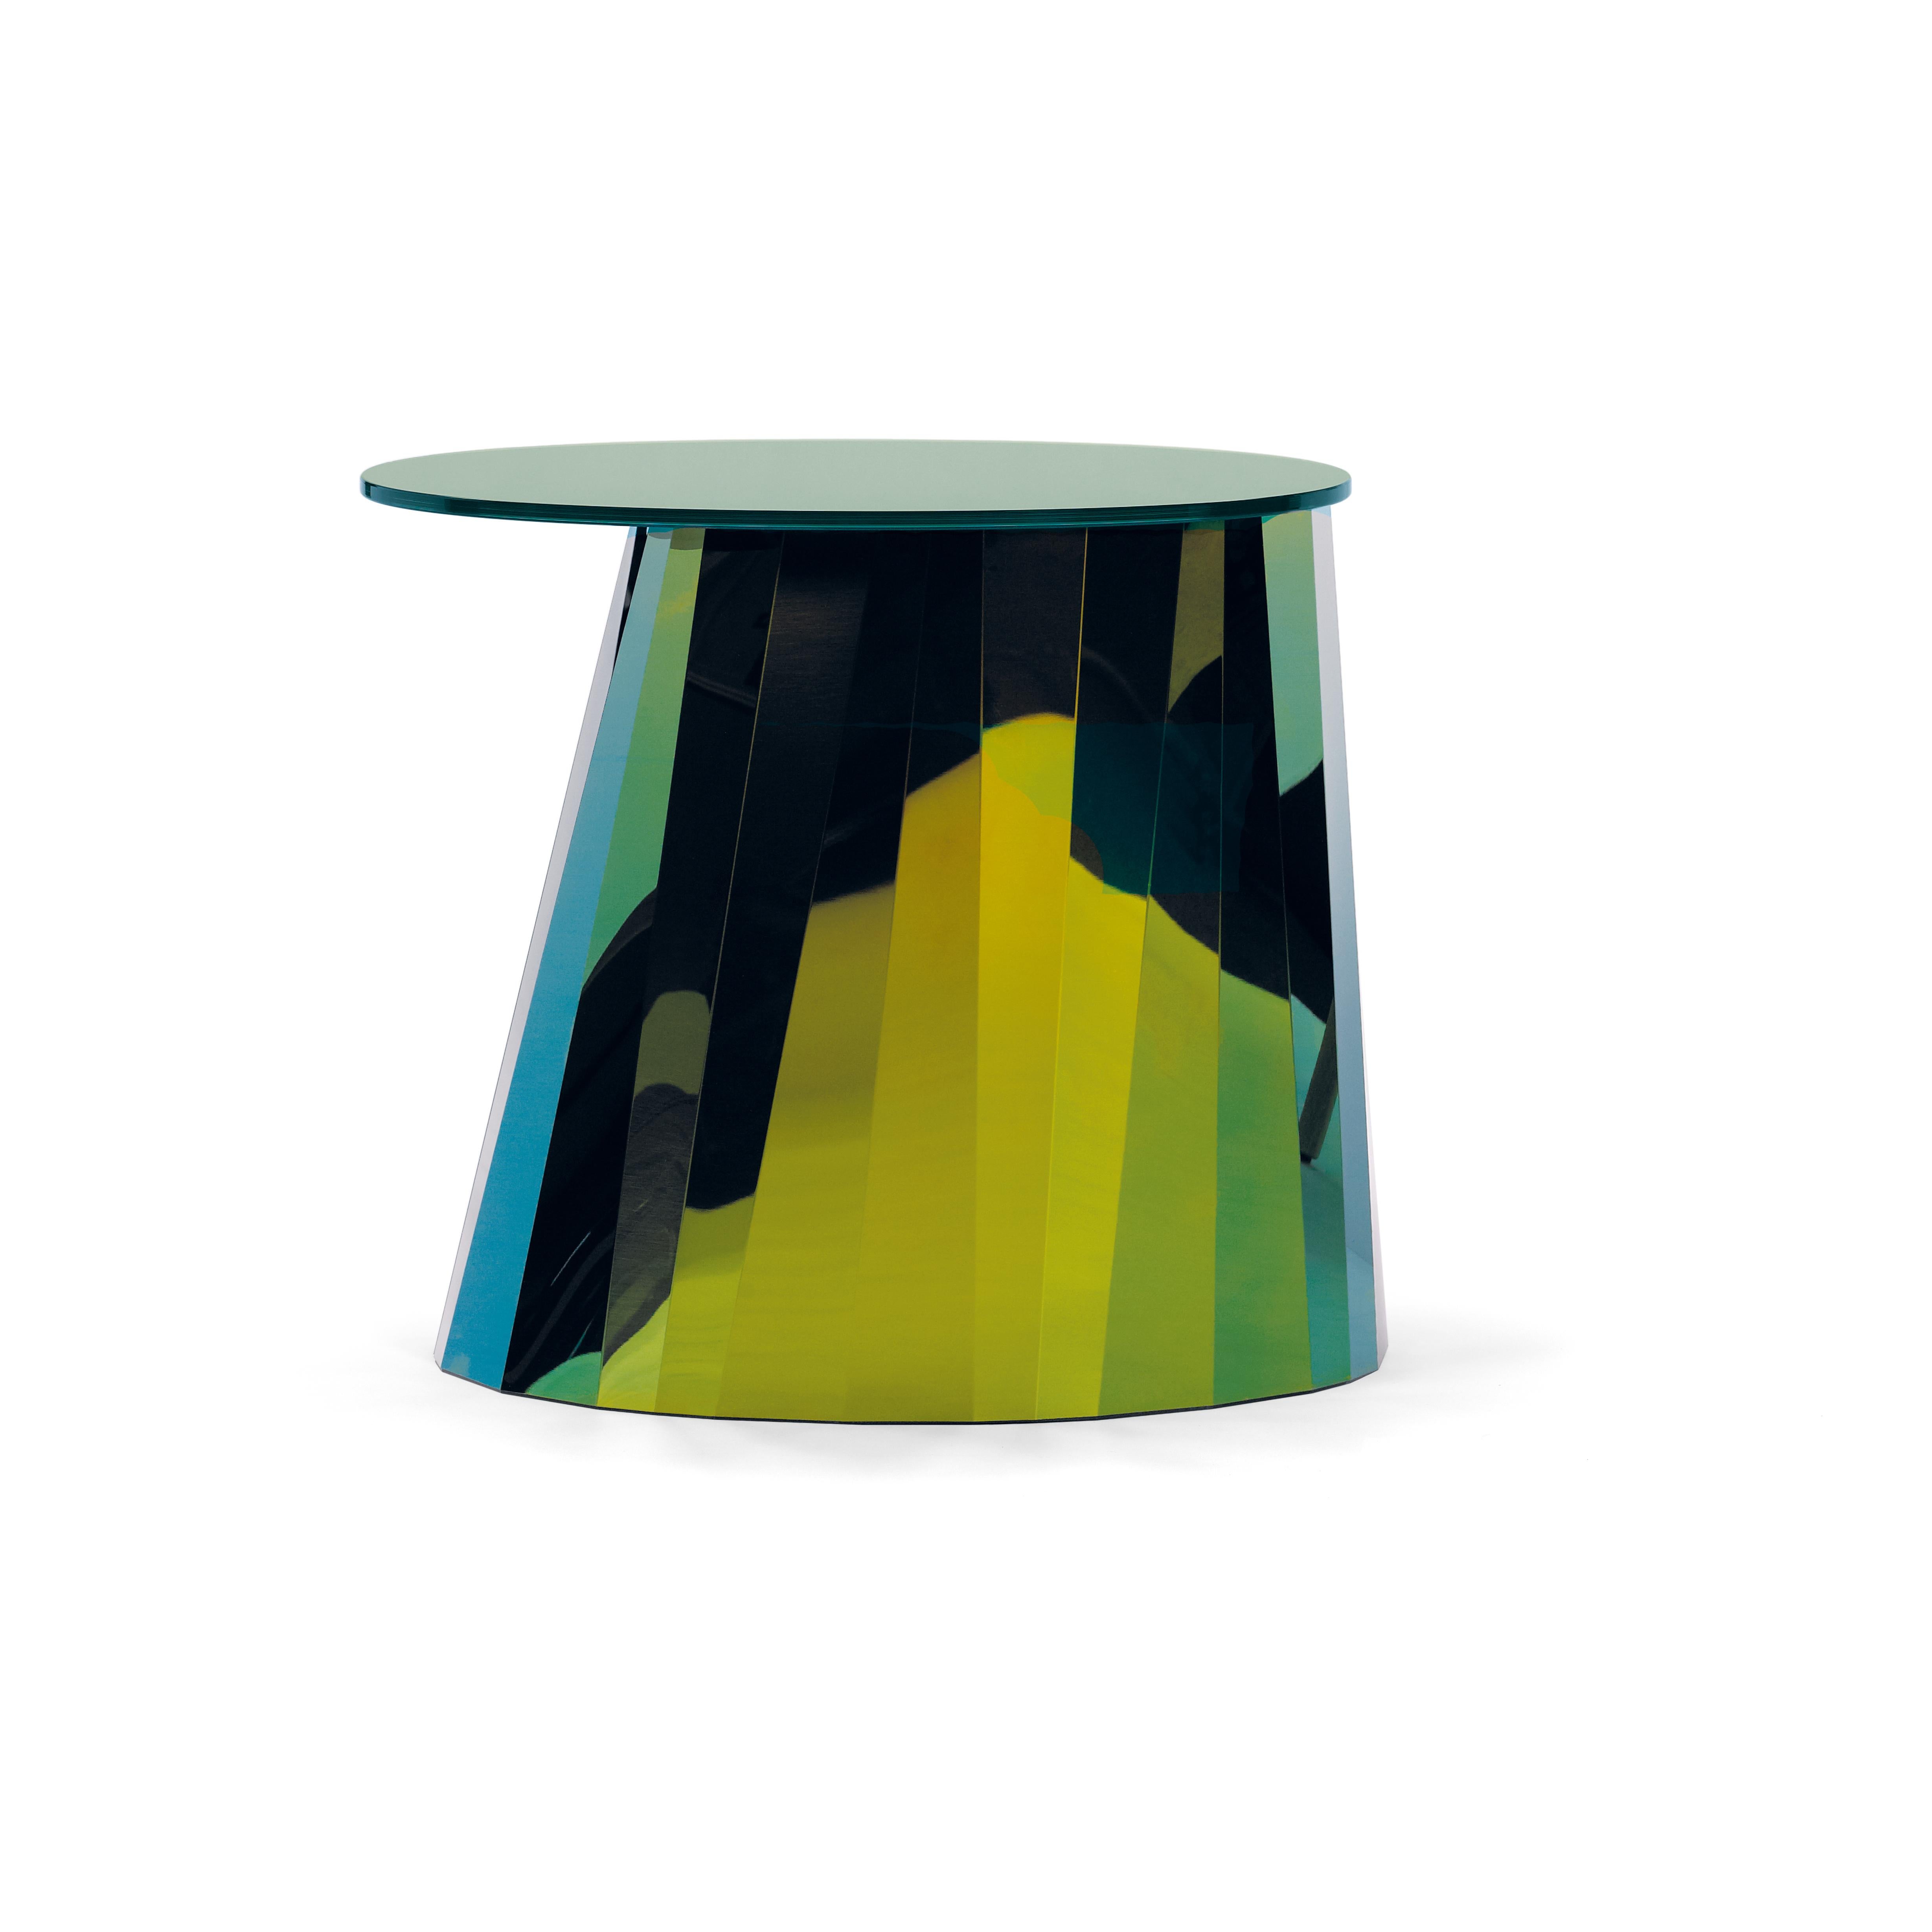 With the Pli side table series French designer Victoria Wilmotte brings objects of unusual crystalline elegance and astonishing geometry to living environments. The bends and folds that gave Pli its name almost make the stainless steel base look